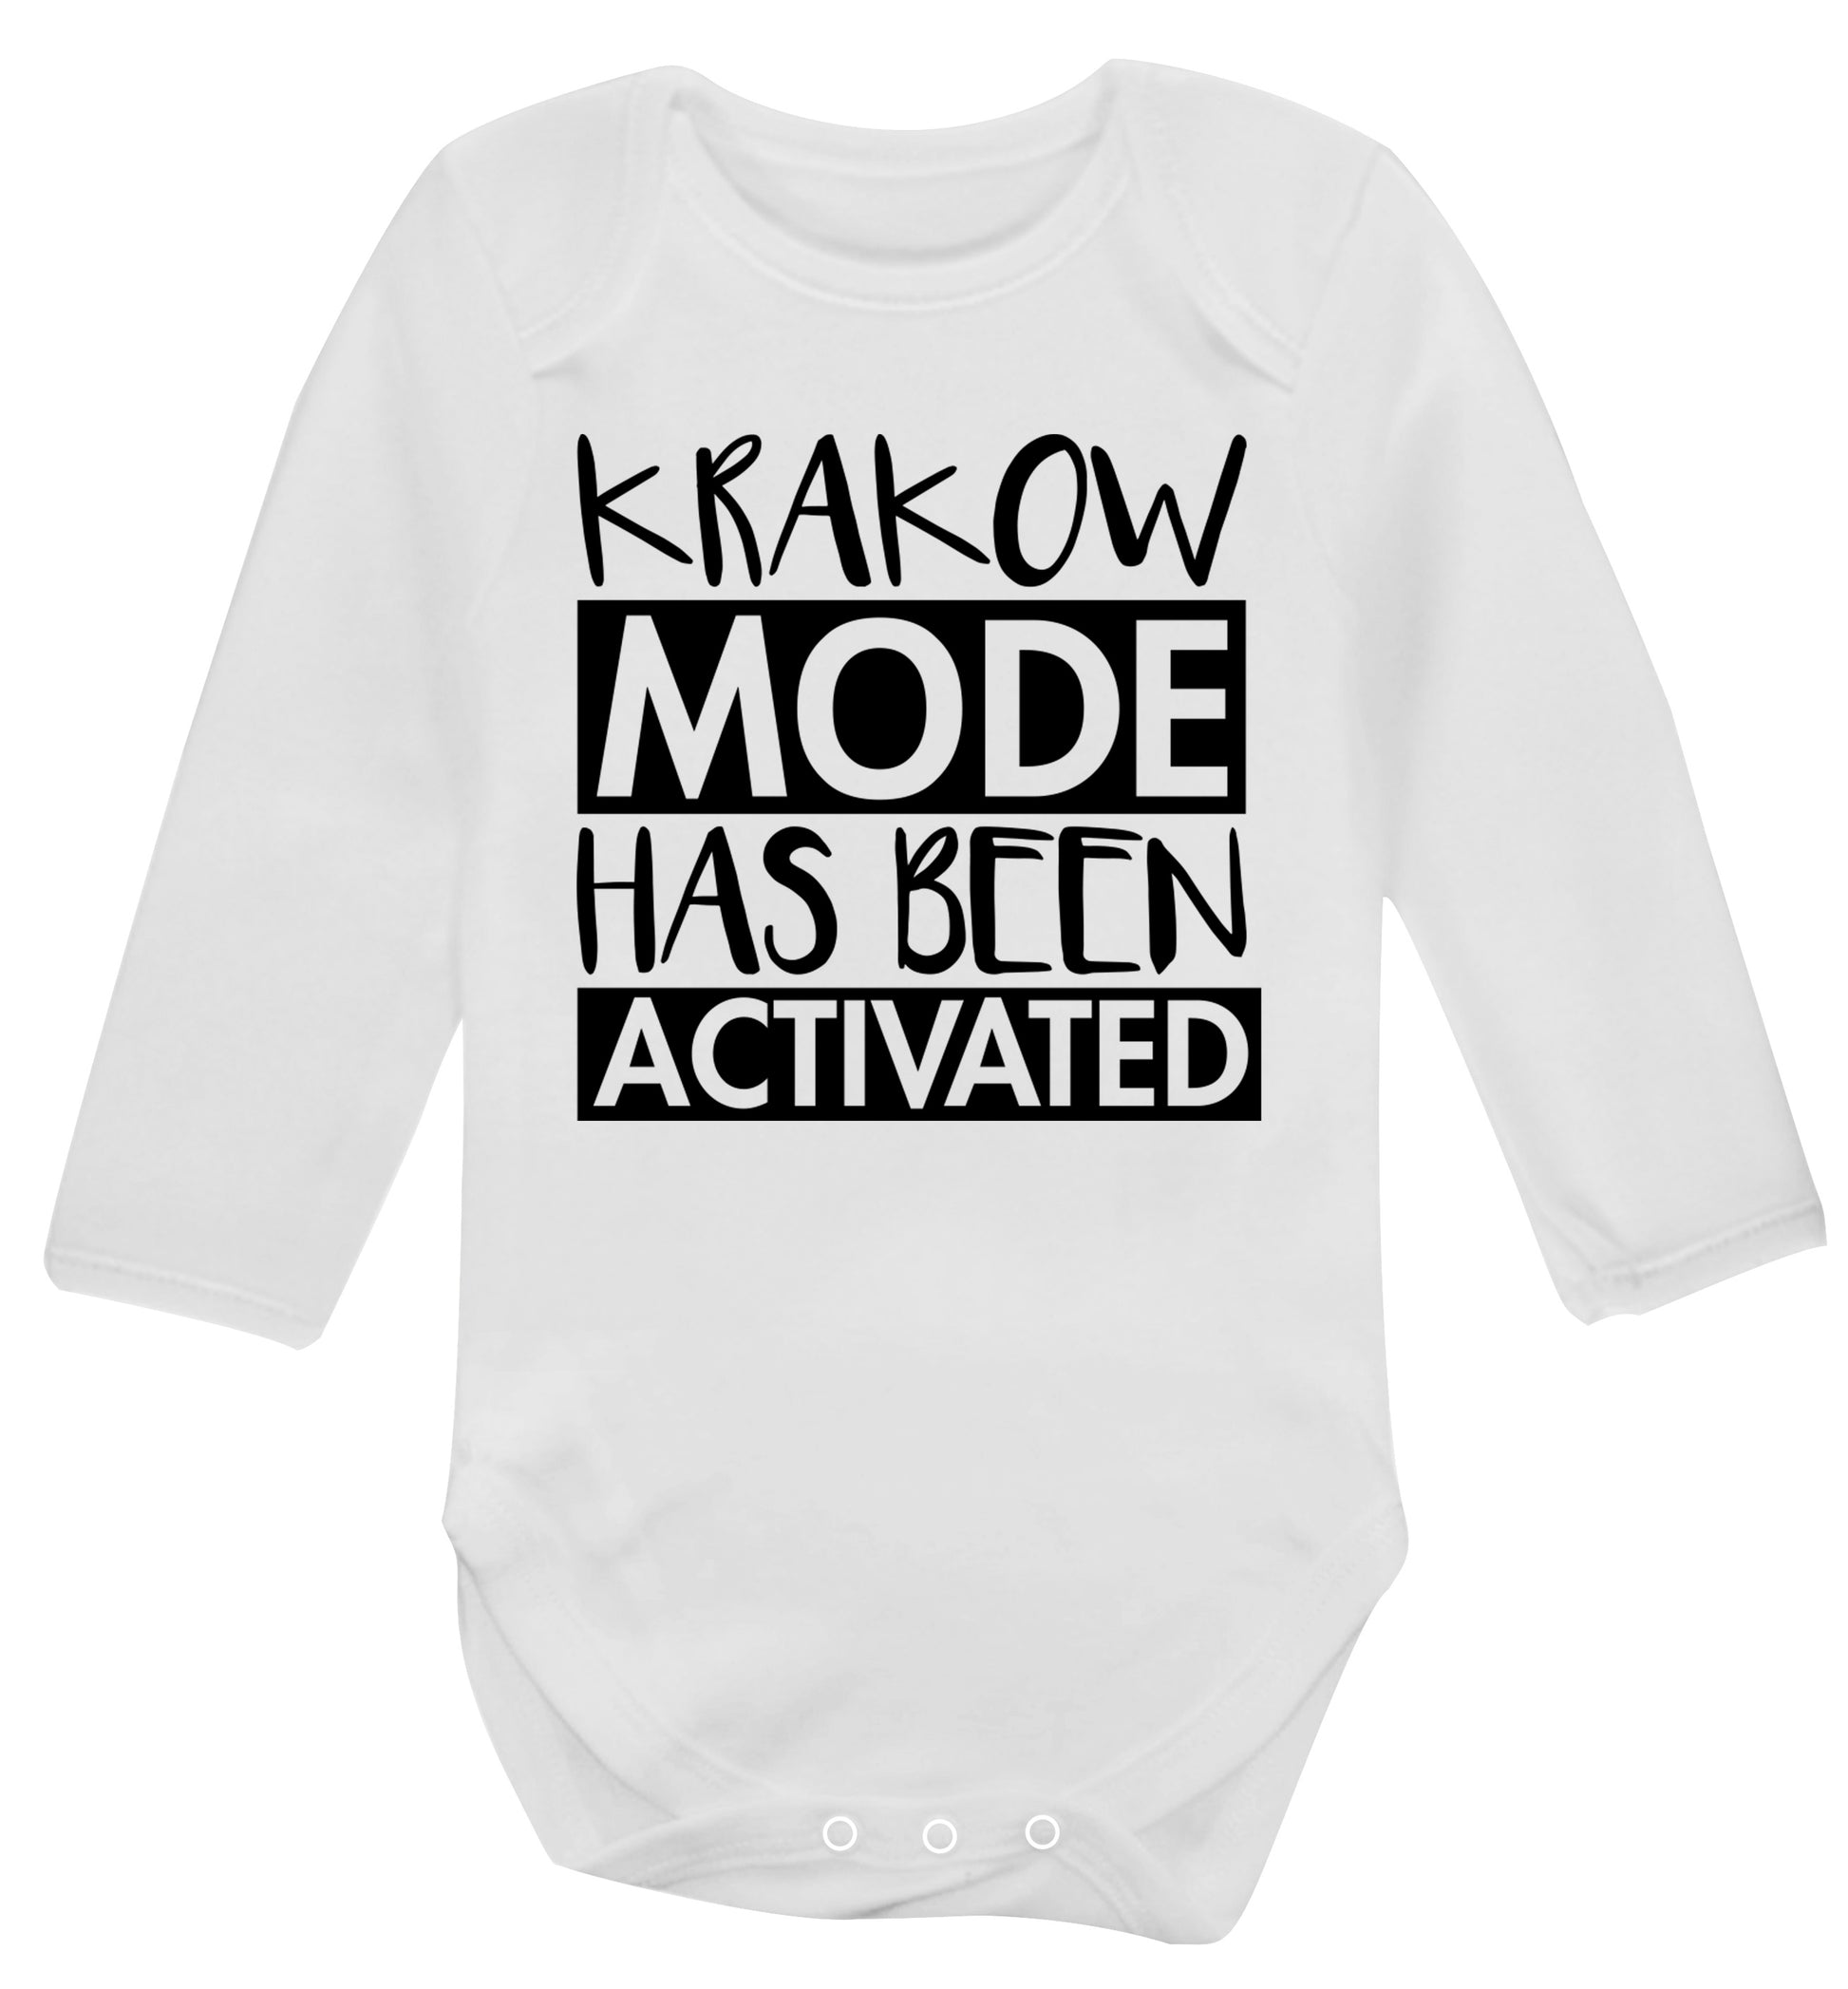 Krakow mode has been activated Baby Vest long sleeved white 6-12 months